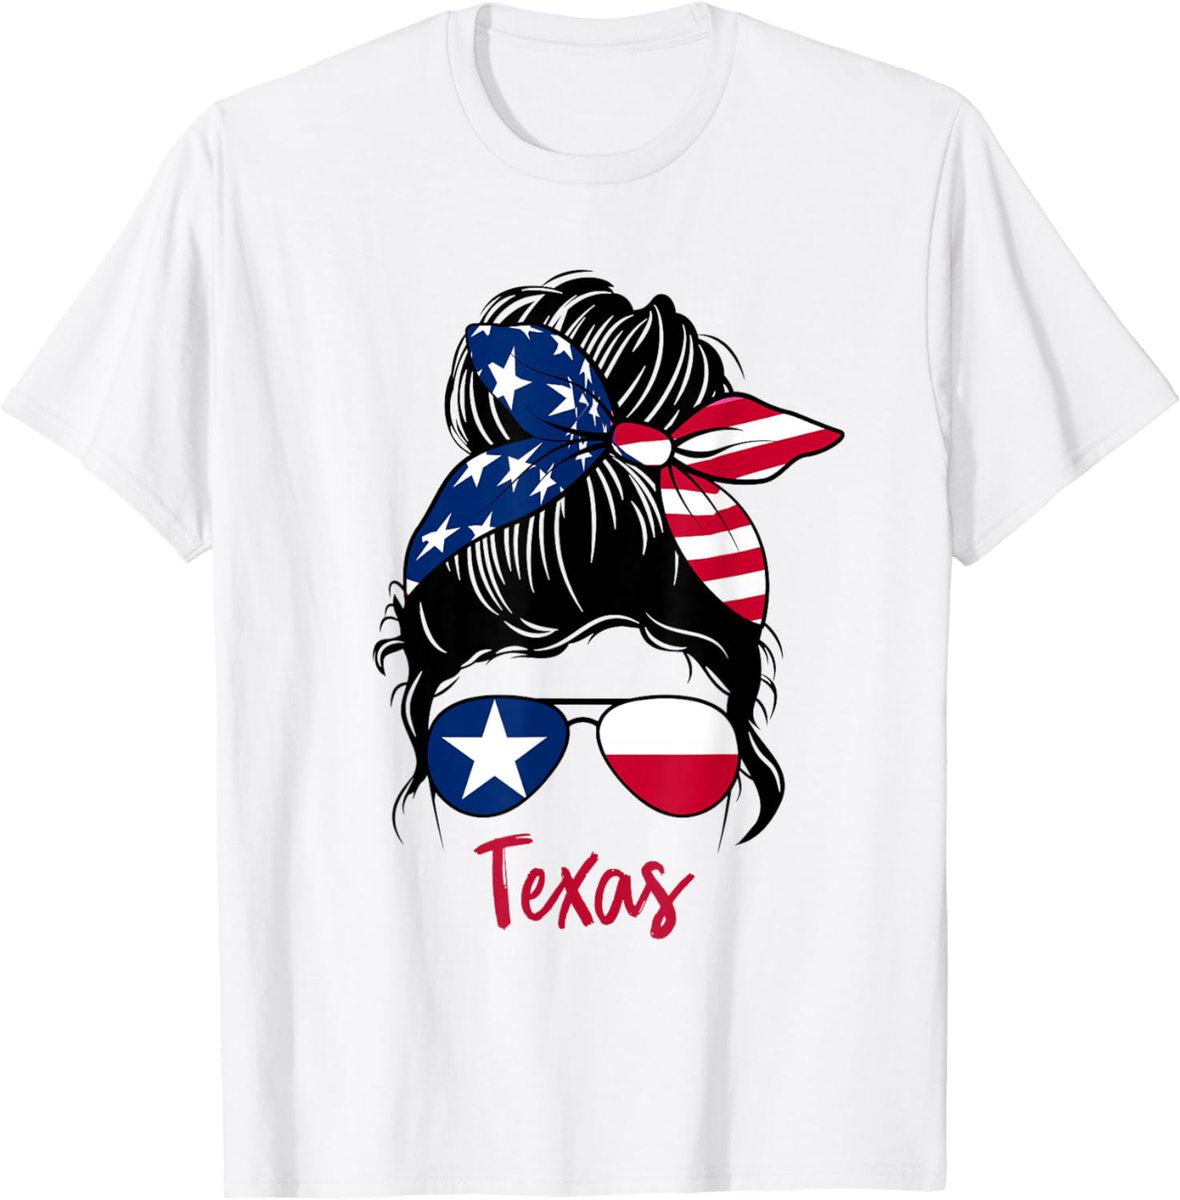 Creativity has no limits and no end
Available here ↳🔥 :amzn.to/3yeXzDL
Texas Flag Girl Texas Flag State Girlfriend messy bun T-Shirt